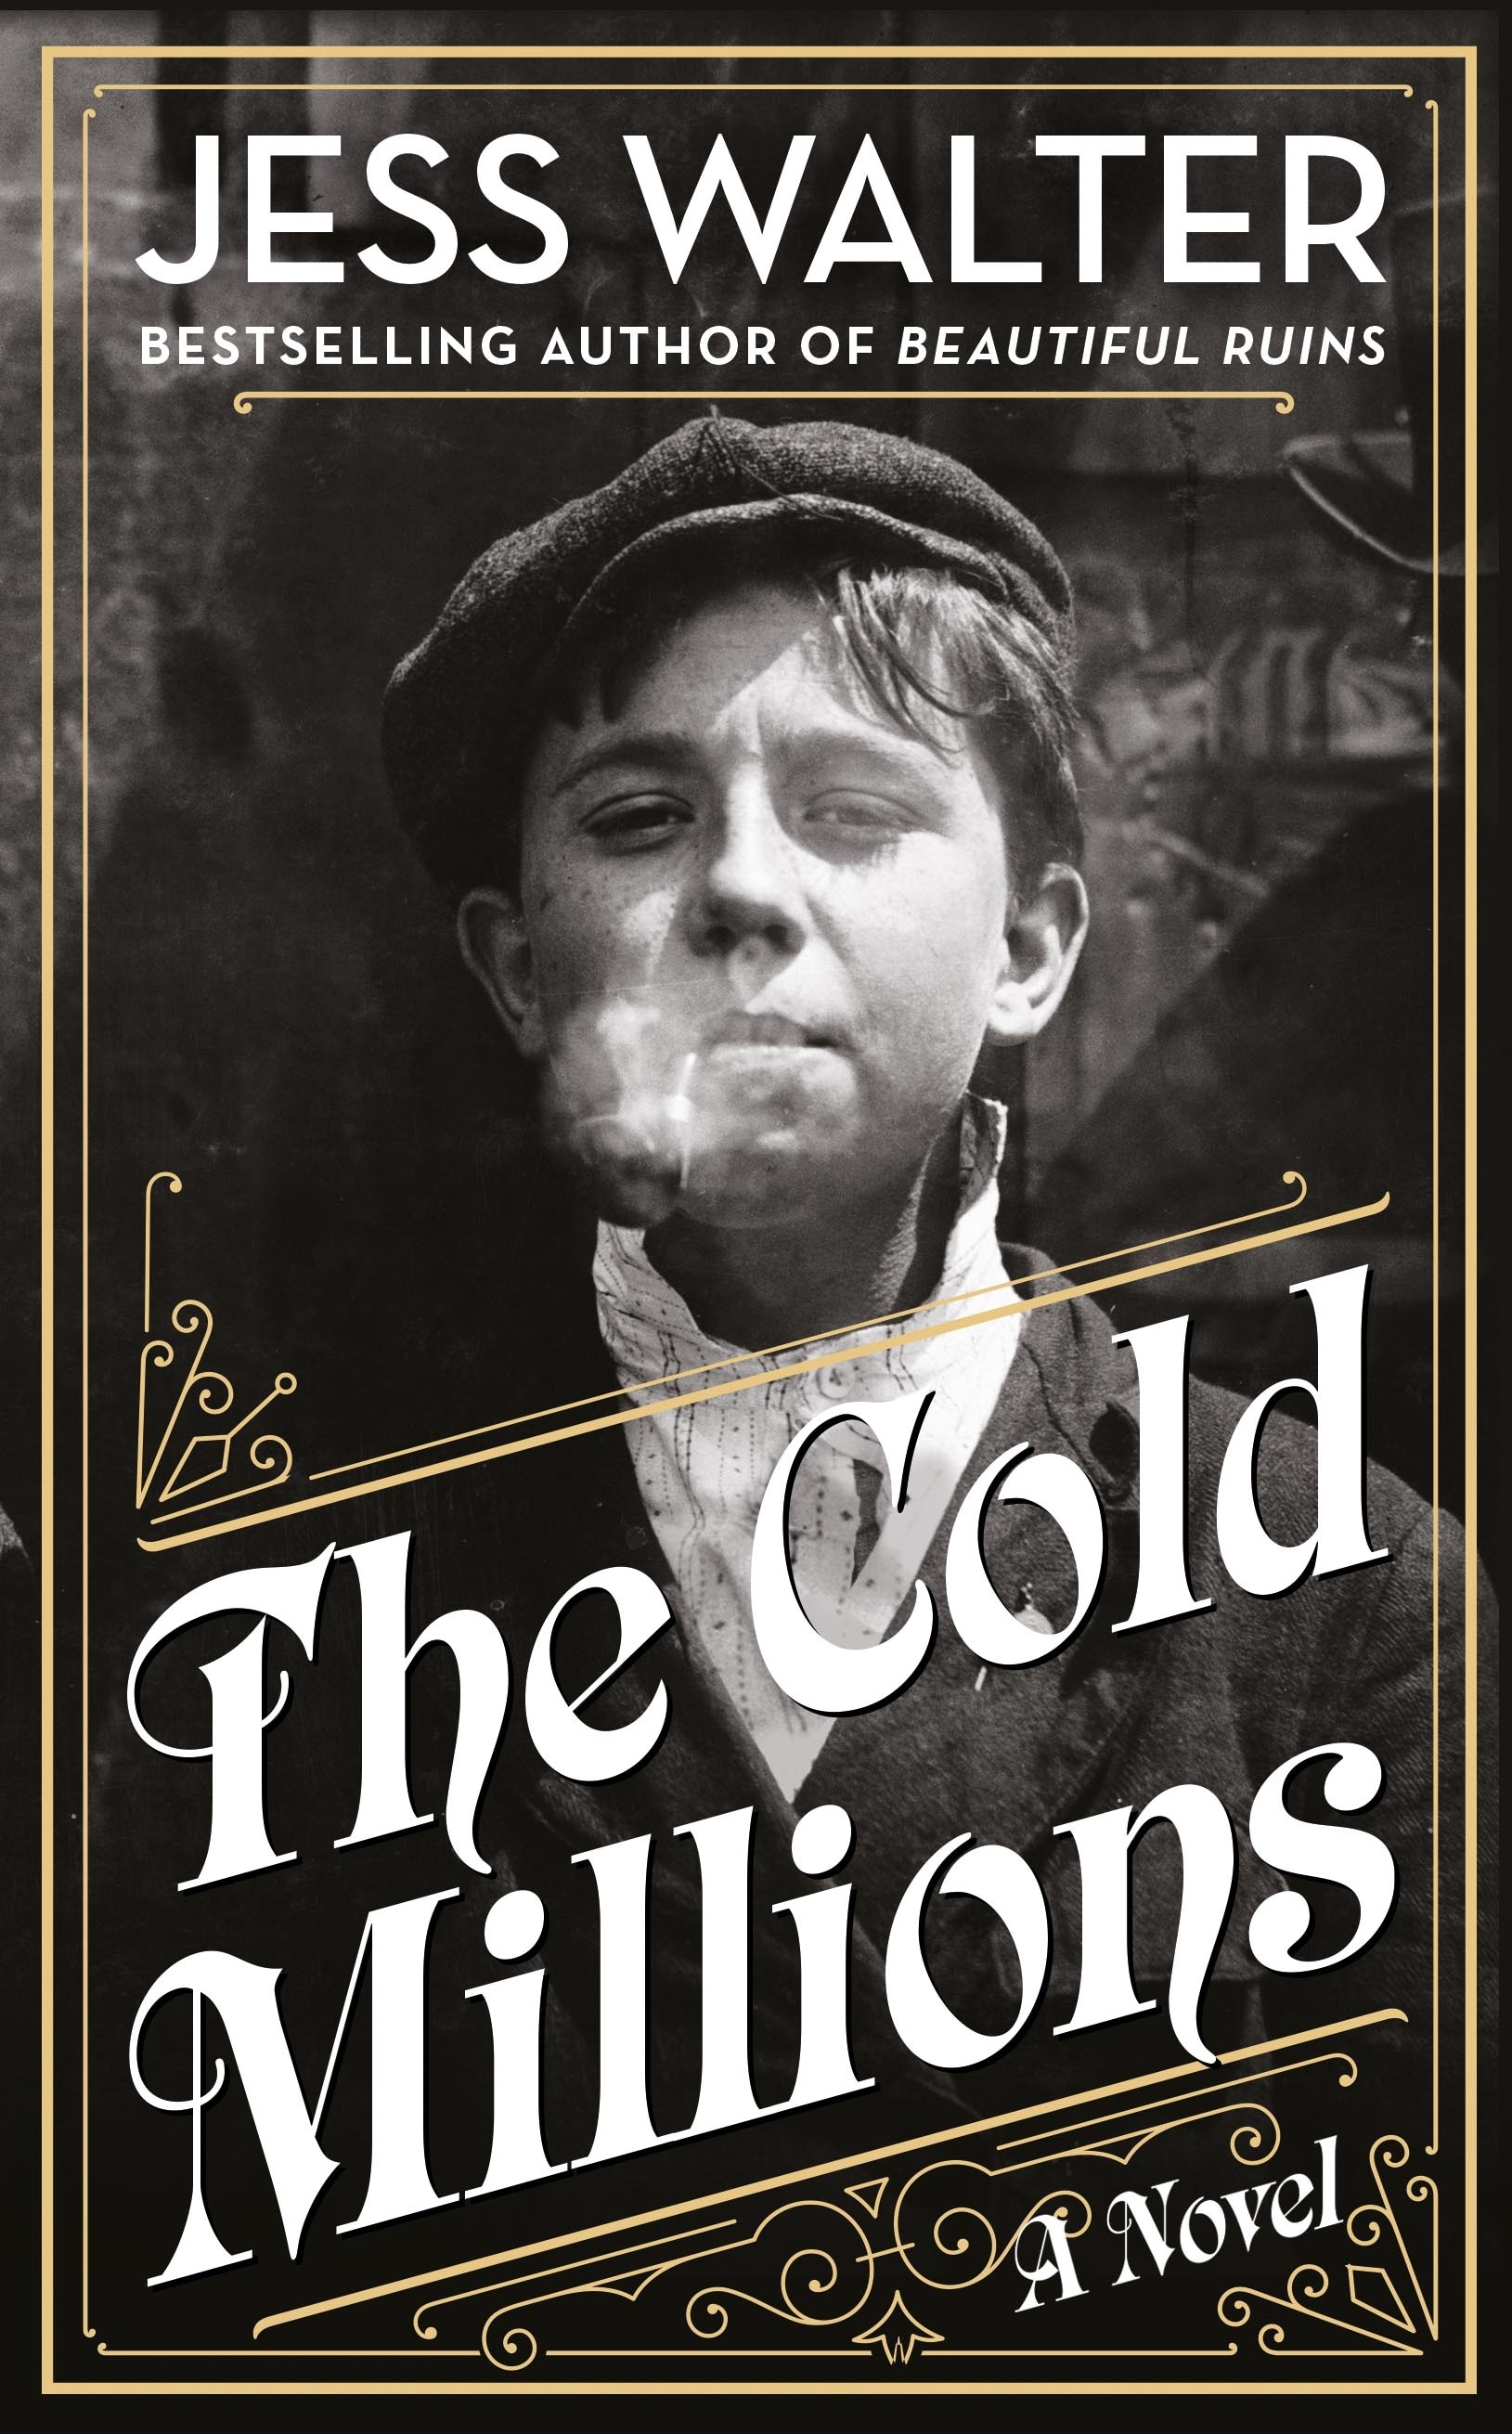 Book “The Cold Millions” by Jess Walter — February 18, 2021